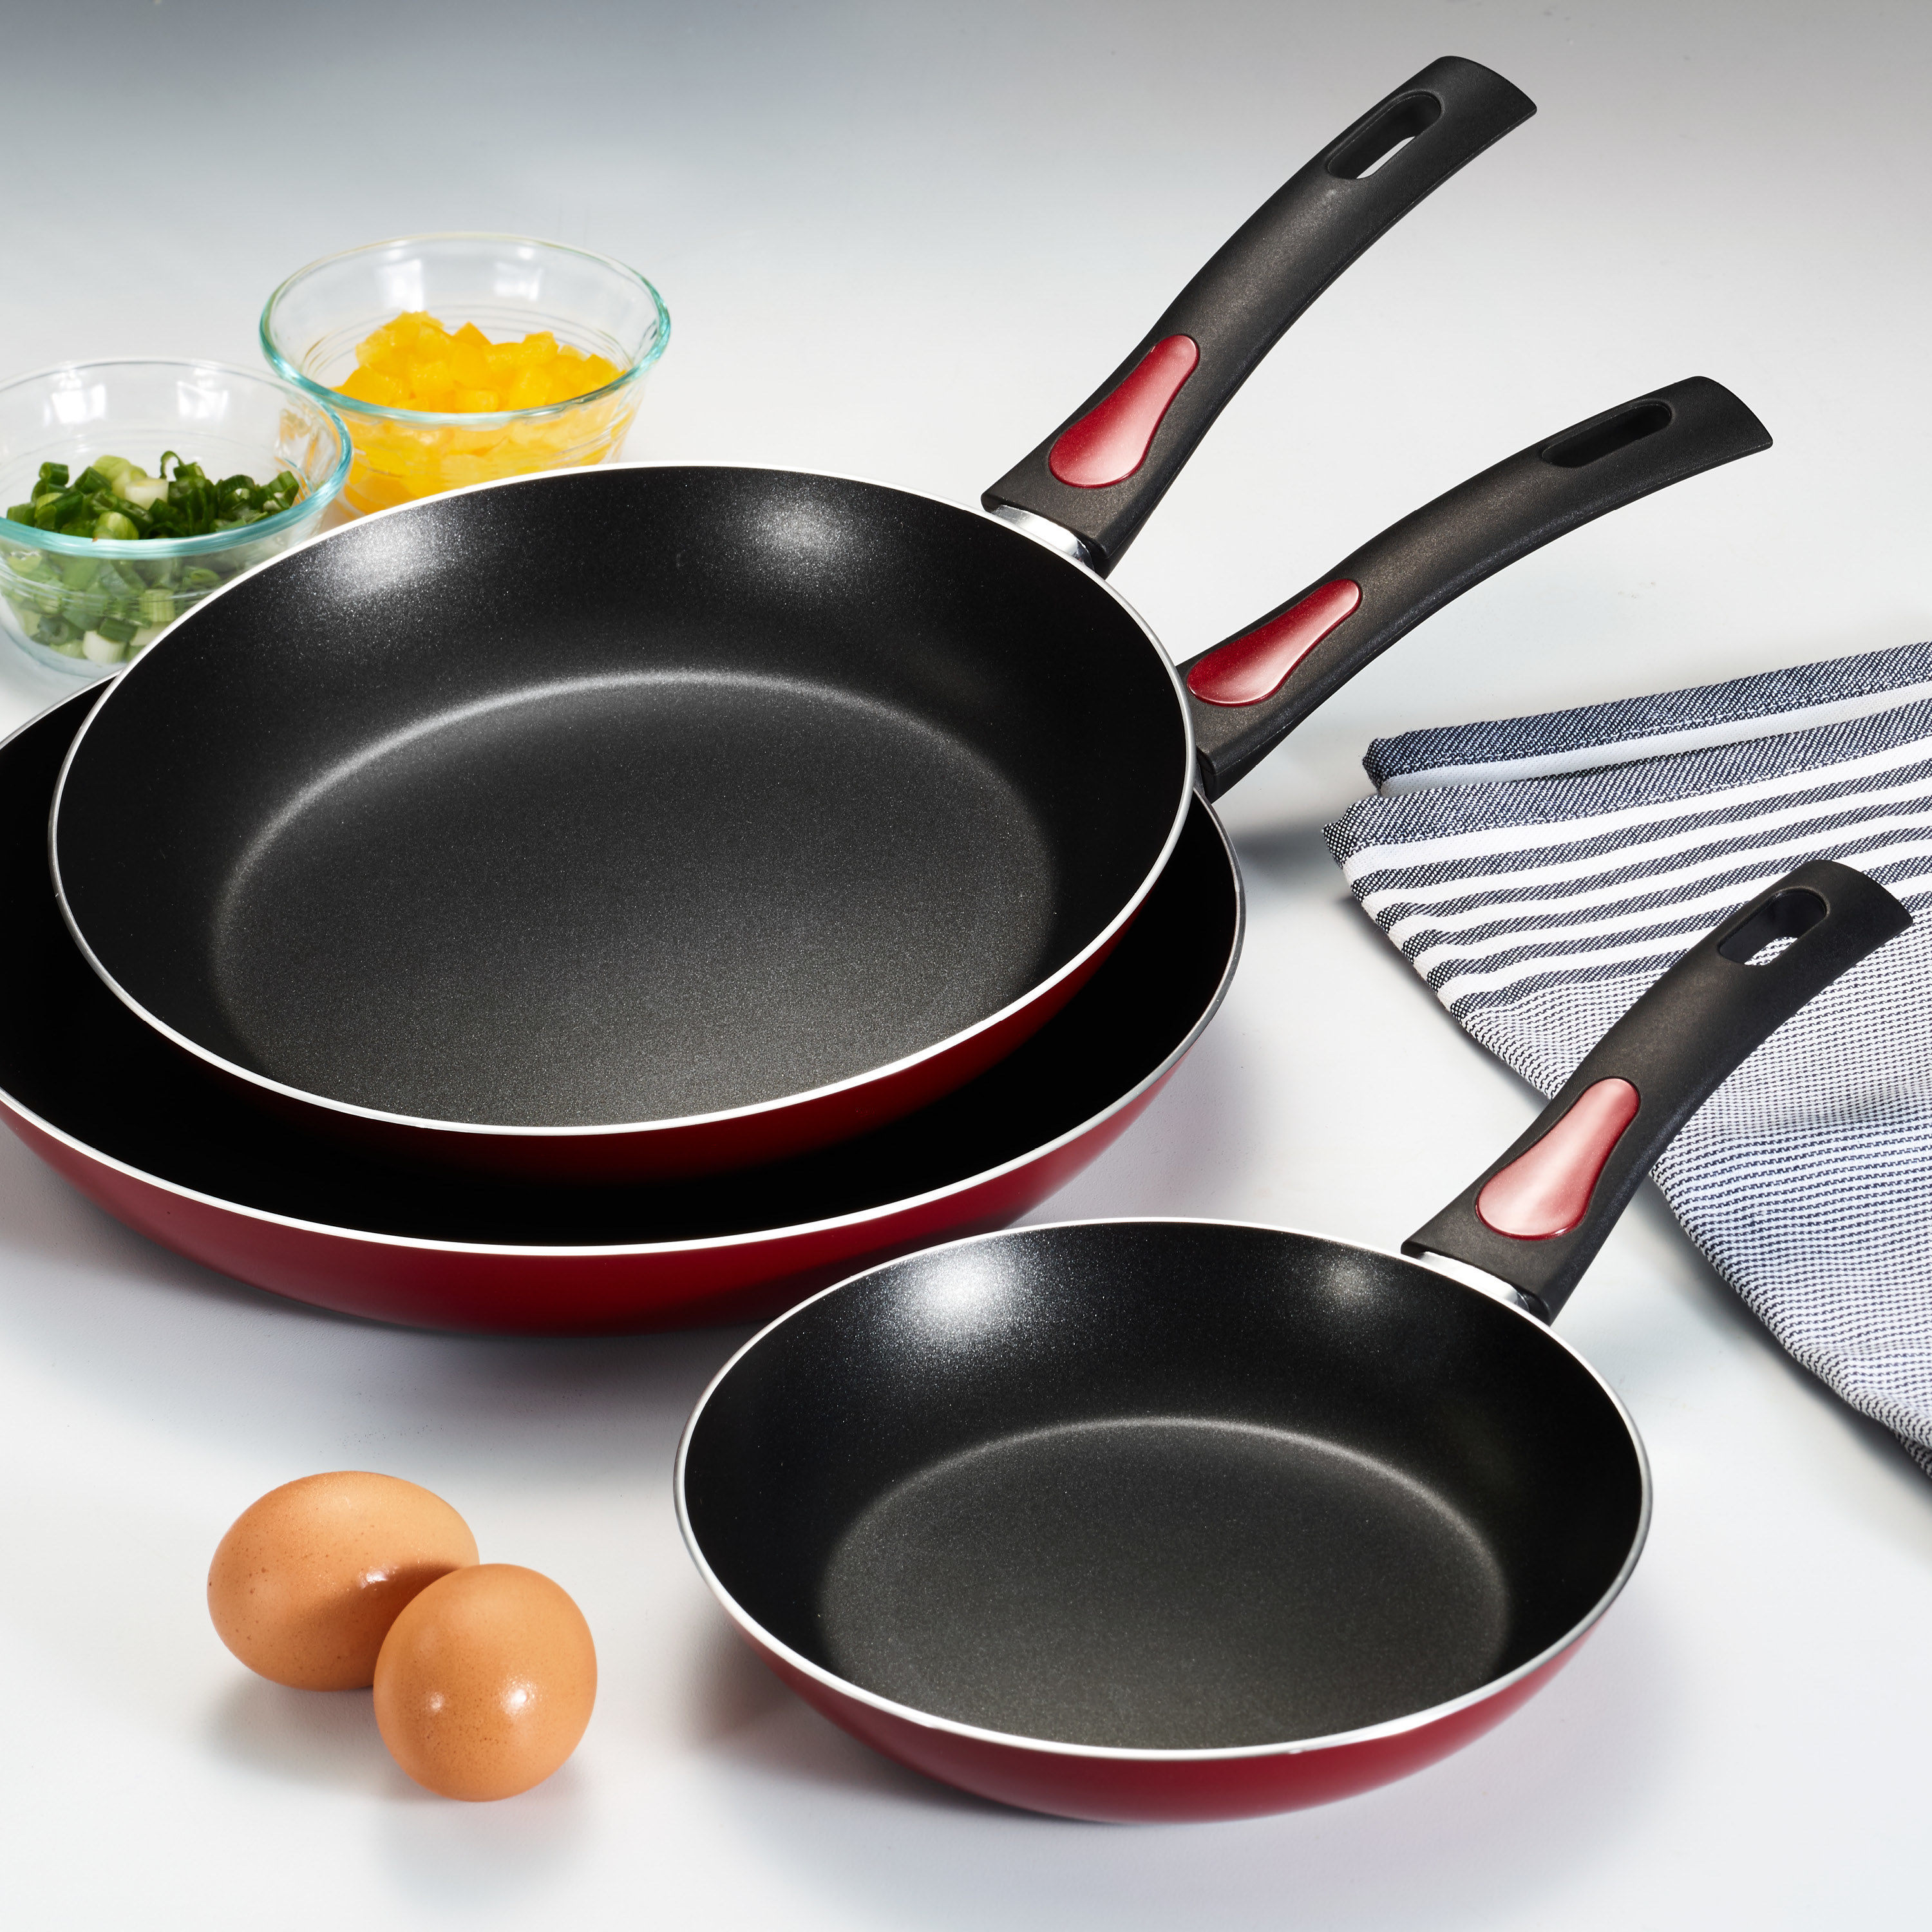 The nonstick pans